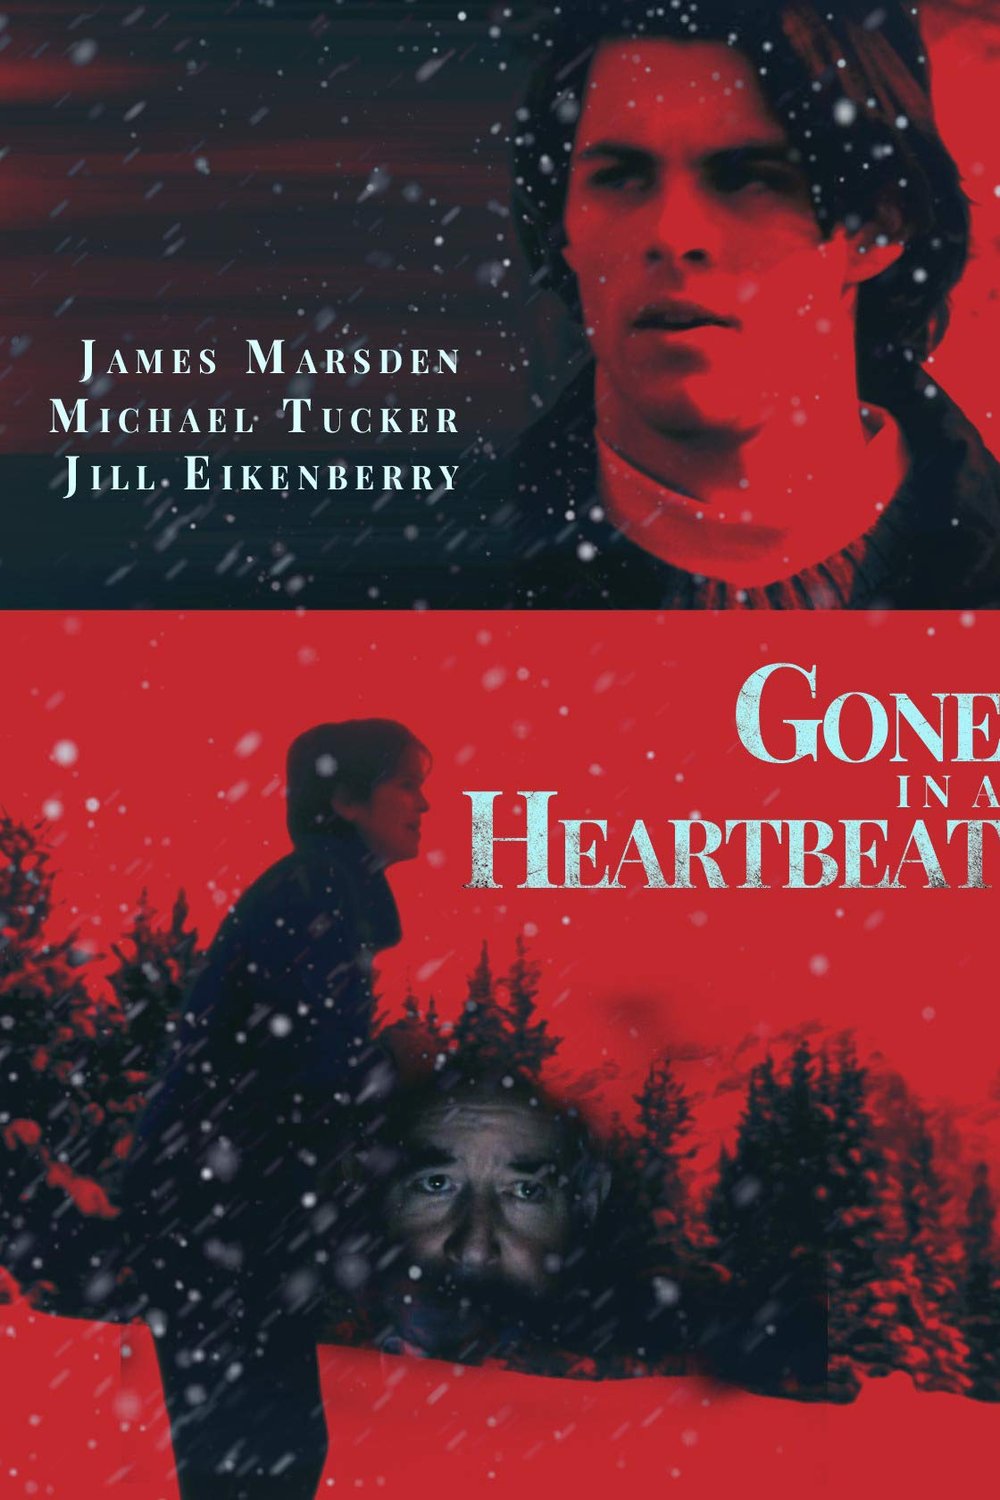 Poster of the movie Gone in a Heartbeat